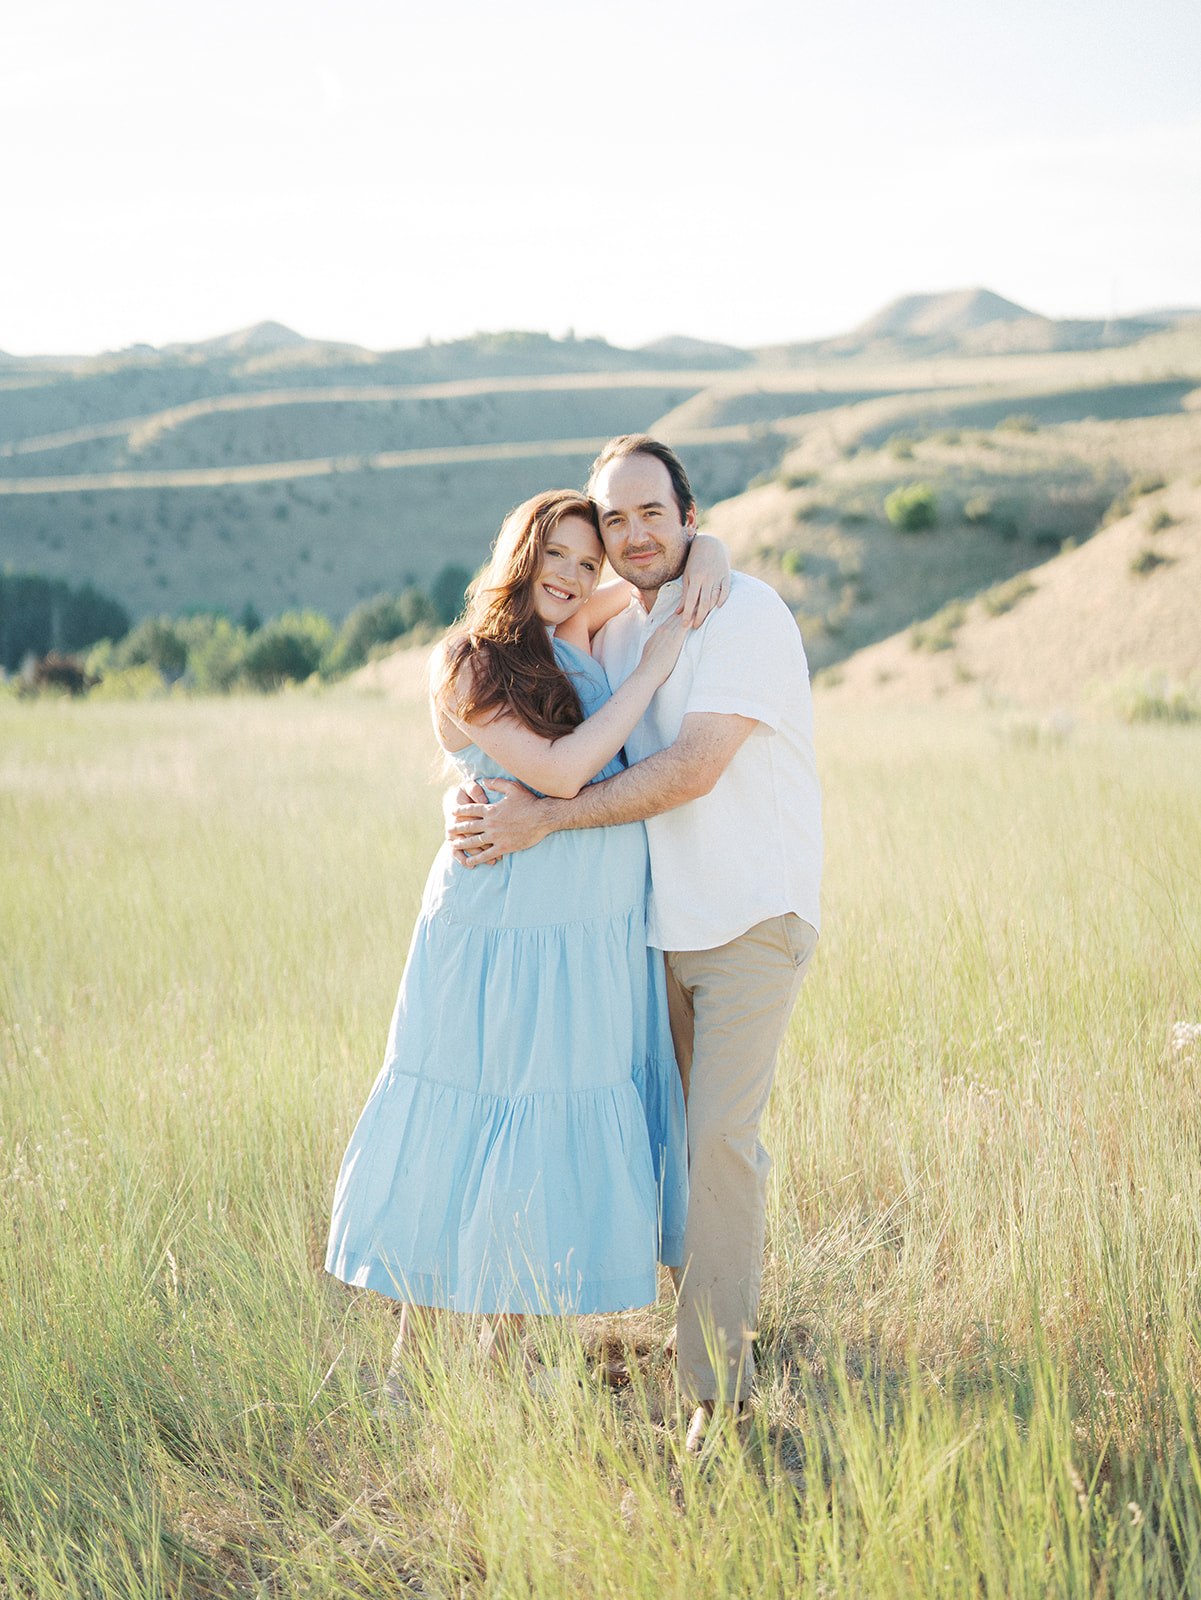 Twin Maternity Session in the Boise Foothills | Maternity photos by Hannah Mann | Idaho photographer serving the Treasur